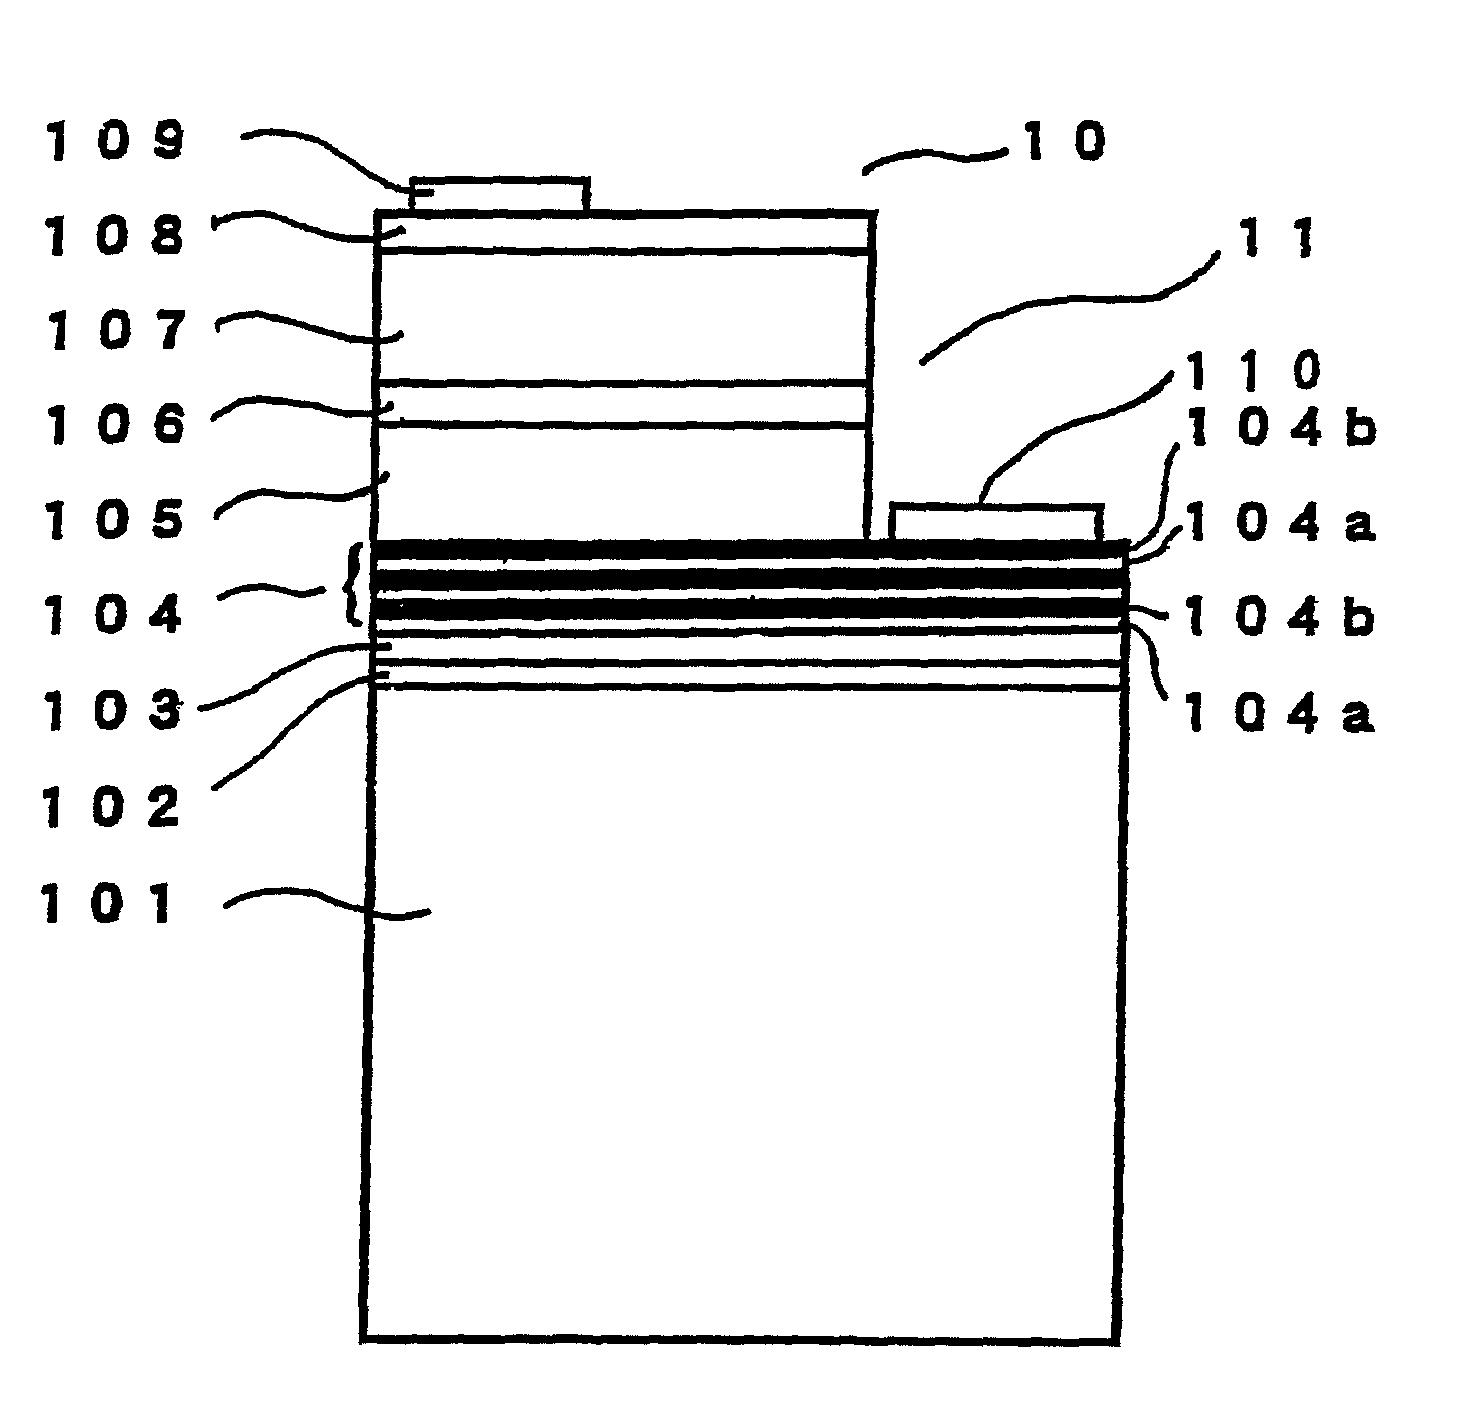 Method of manufacturing a semiconductor device having a group-III nitride superlattice layer on a silicon substrate